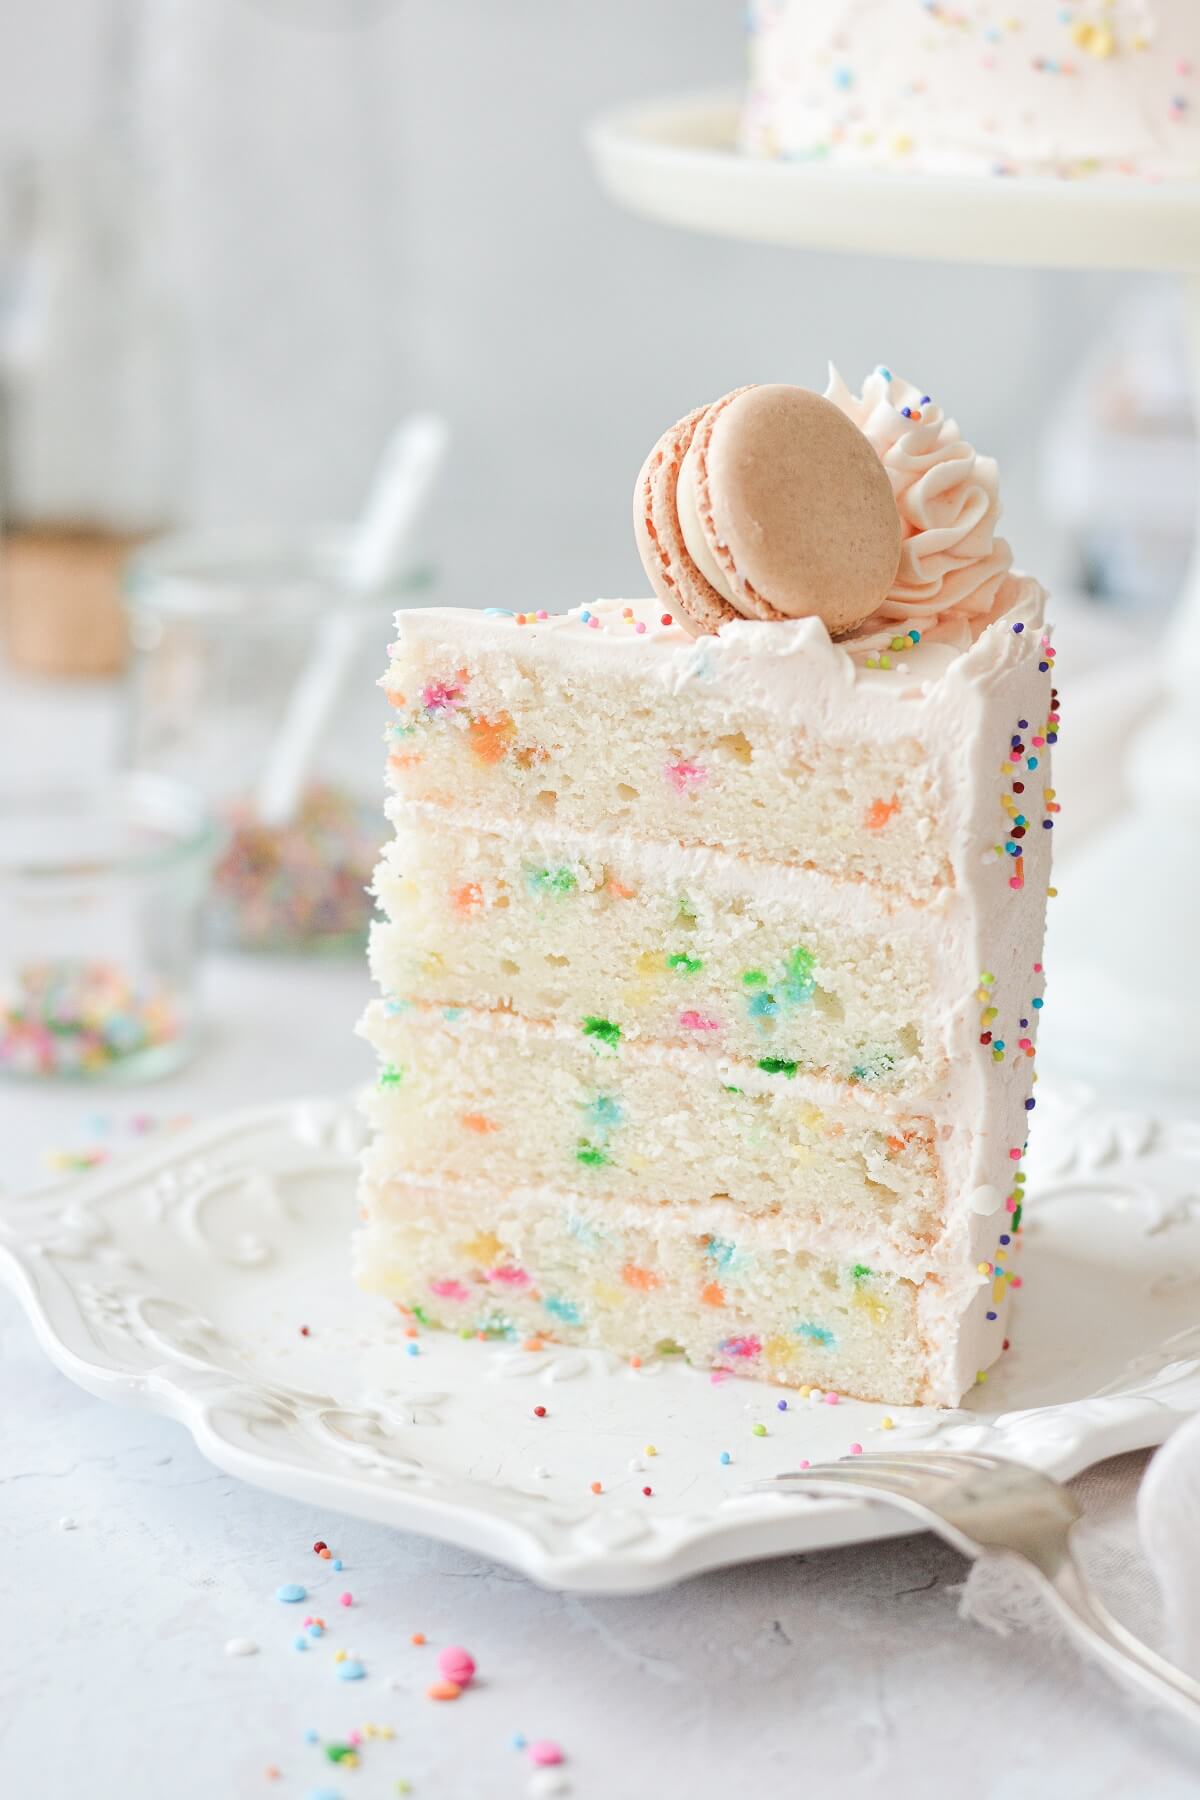 A slice of funfetti cake, topped with a macaron.